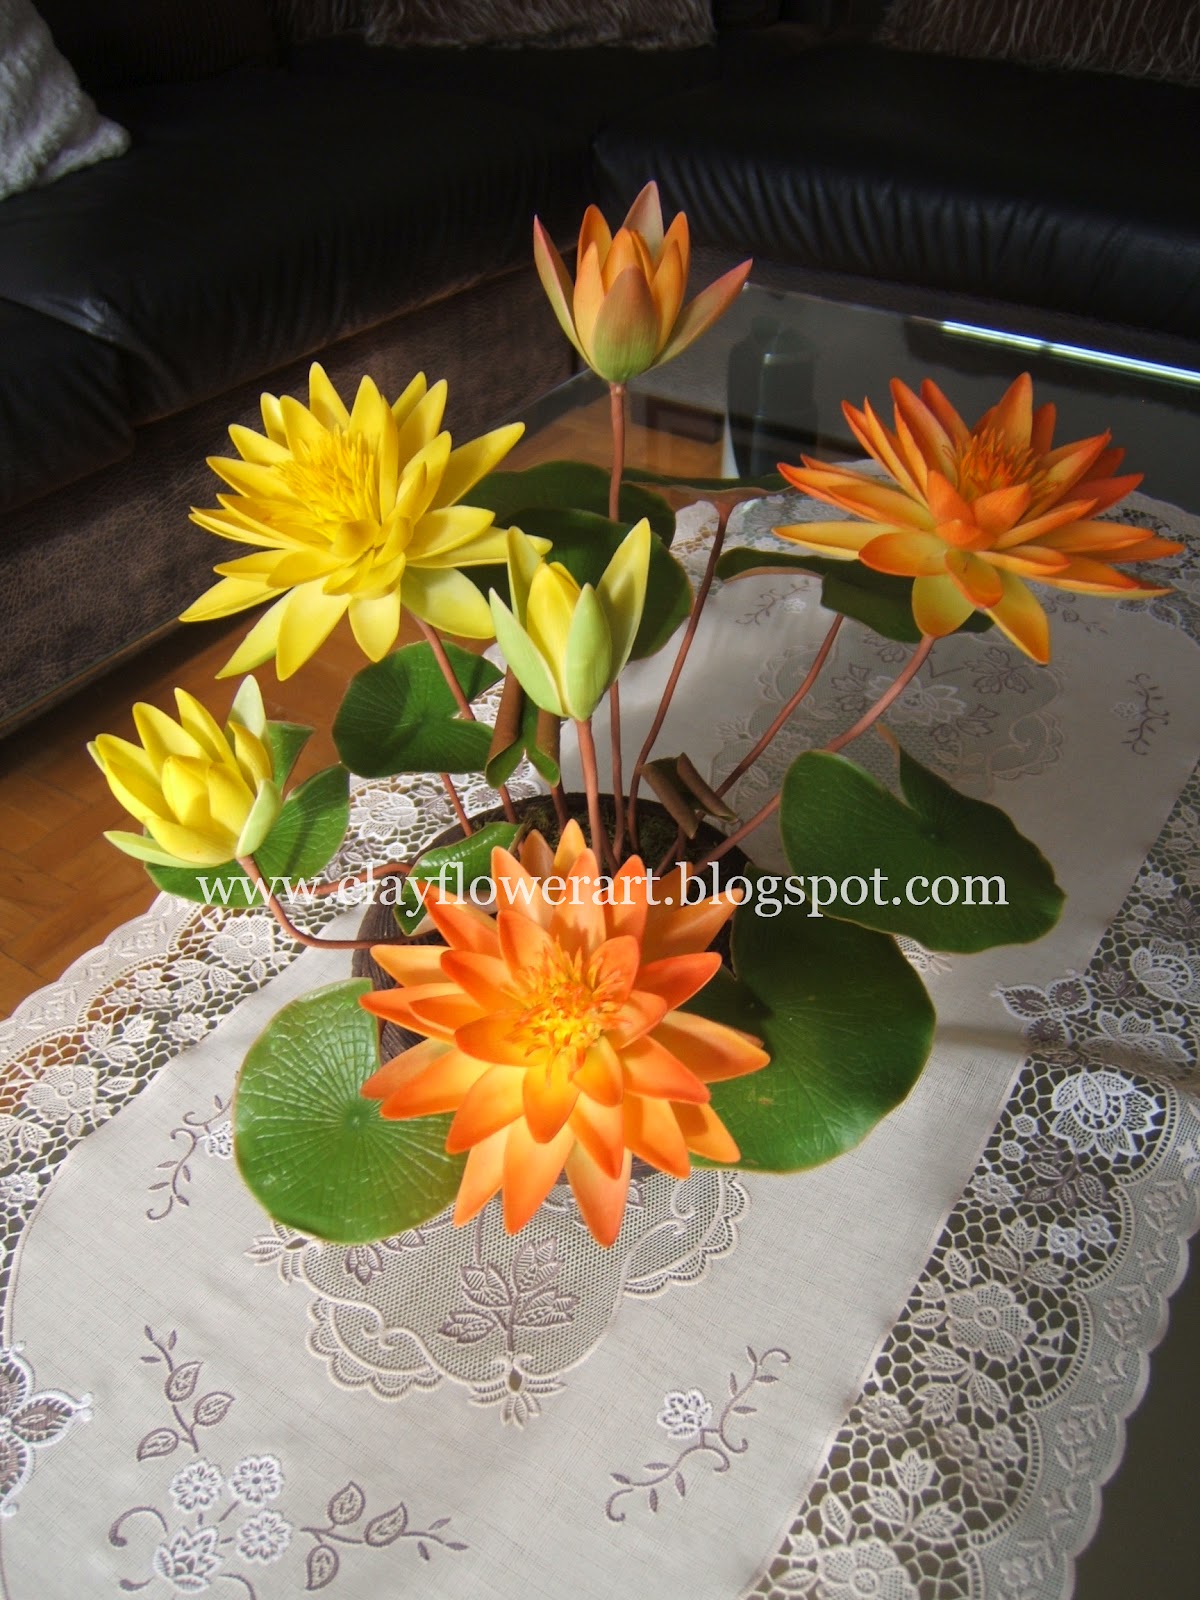 Water Lily - Thai Clay Flowers - Clay Flower Art